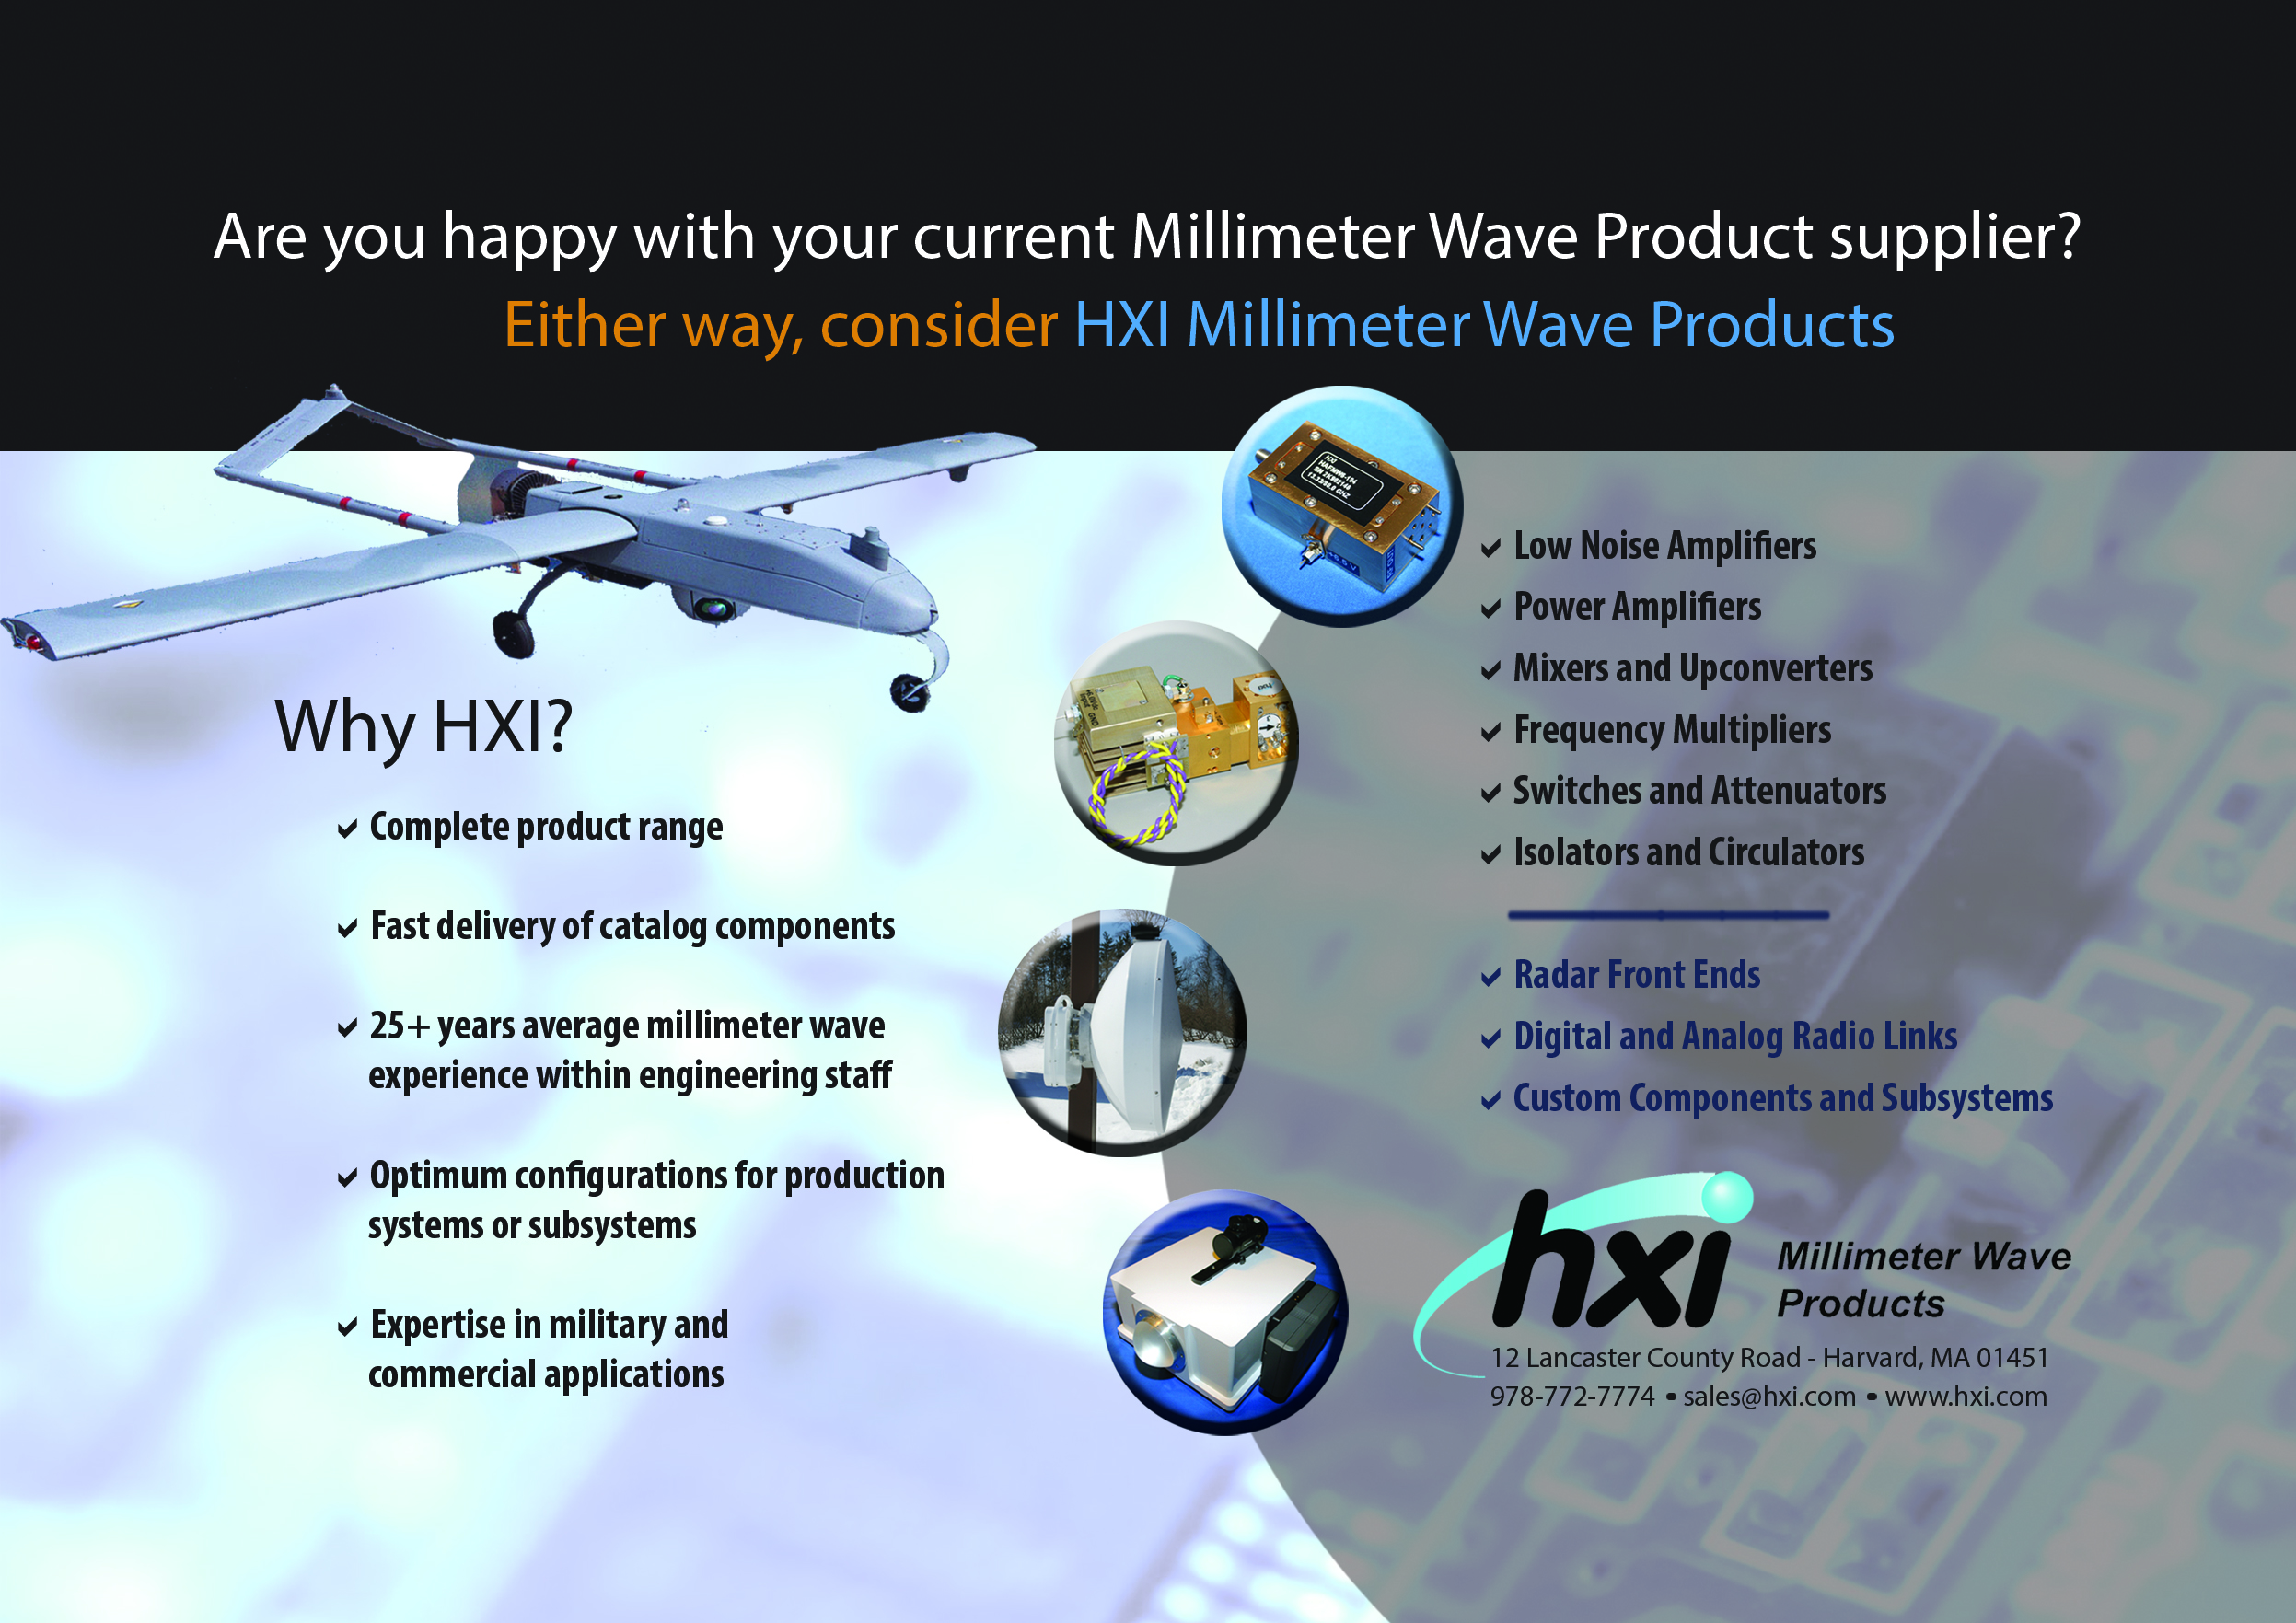 HXI - Millimeter Wave Products